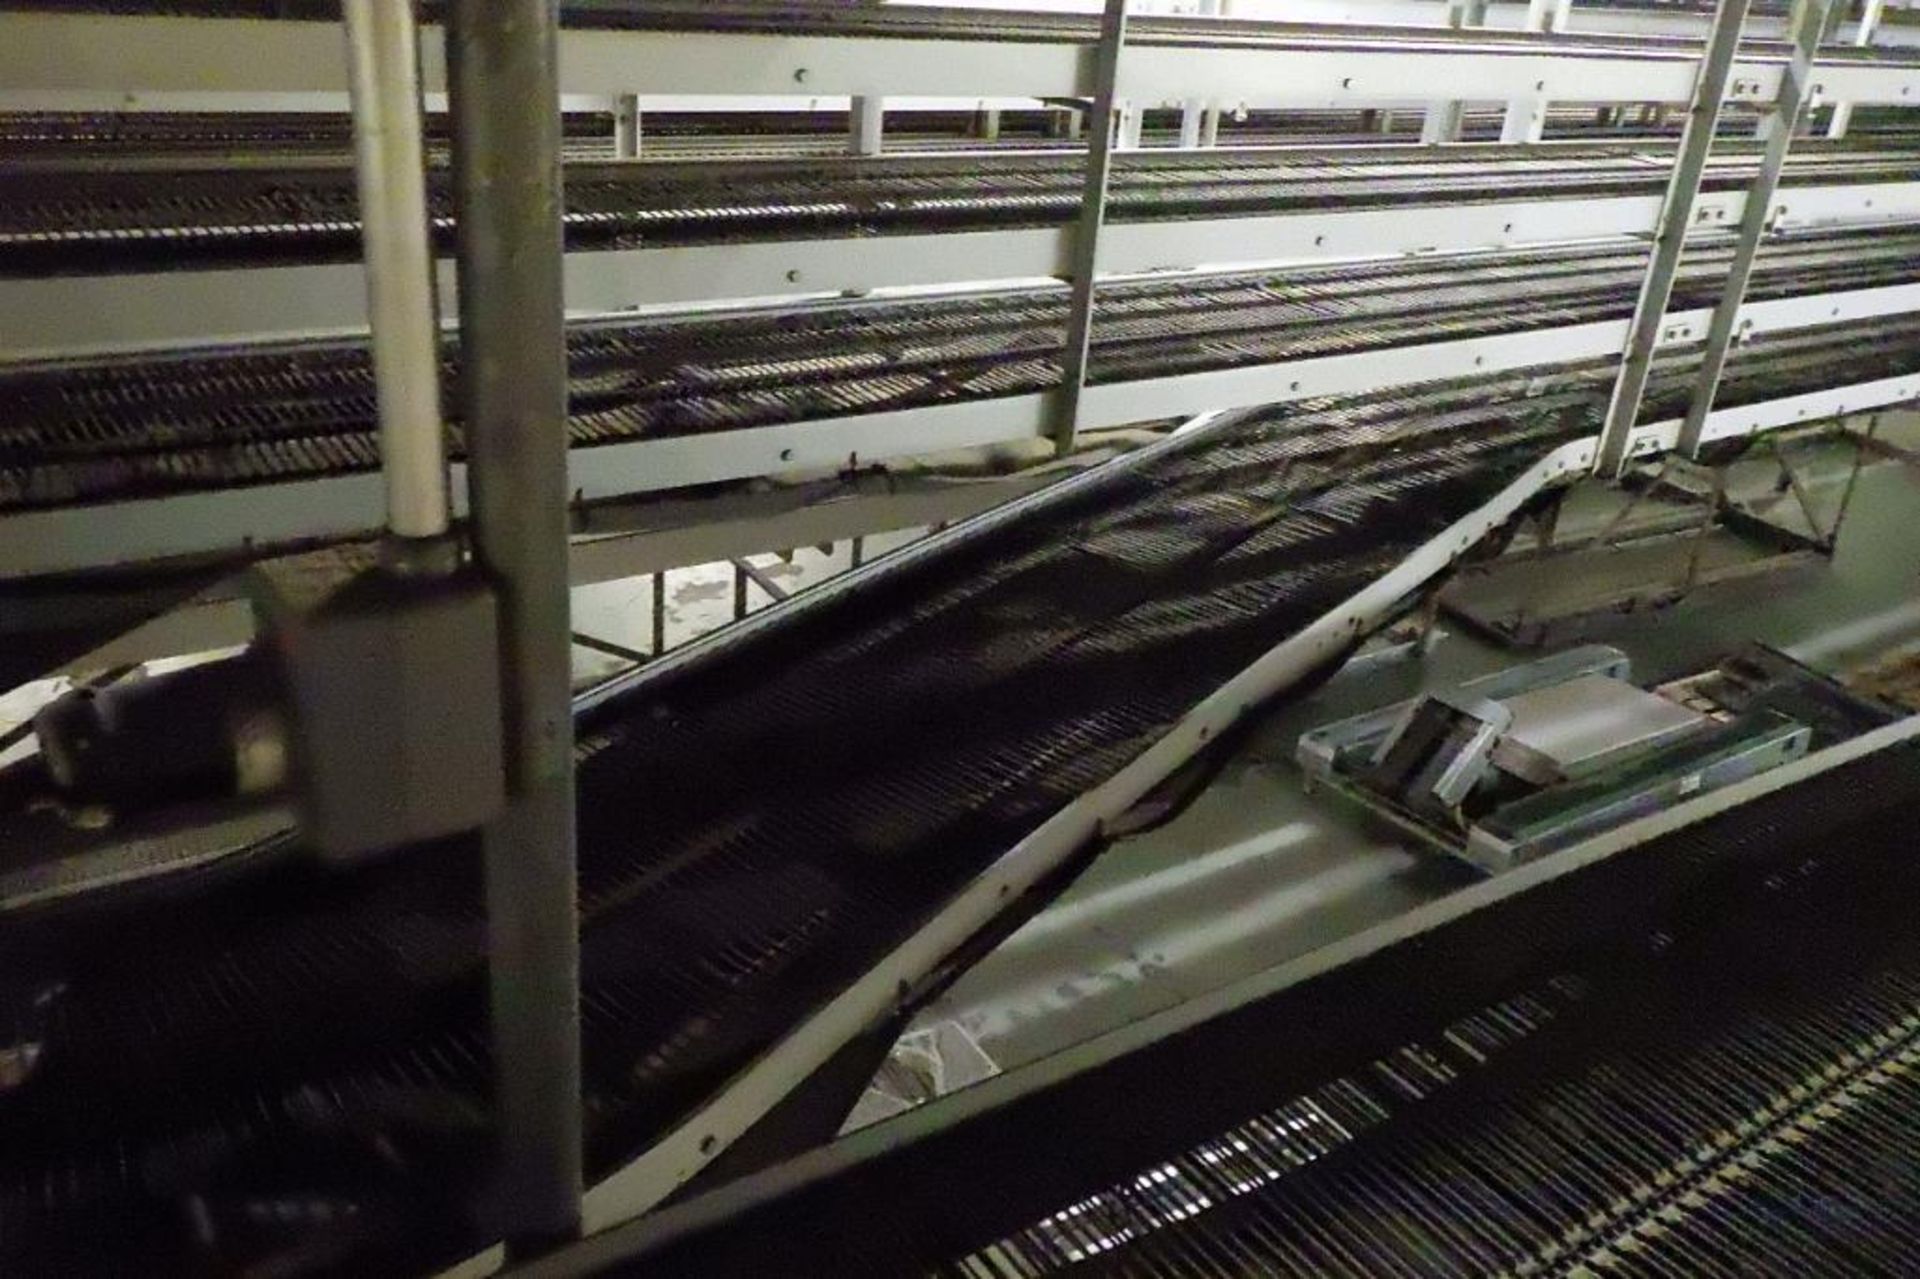 Stewart systems racetrack cooling conveyor - Image 22 of 26